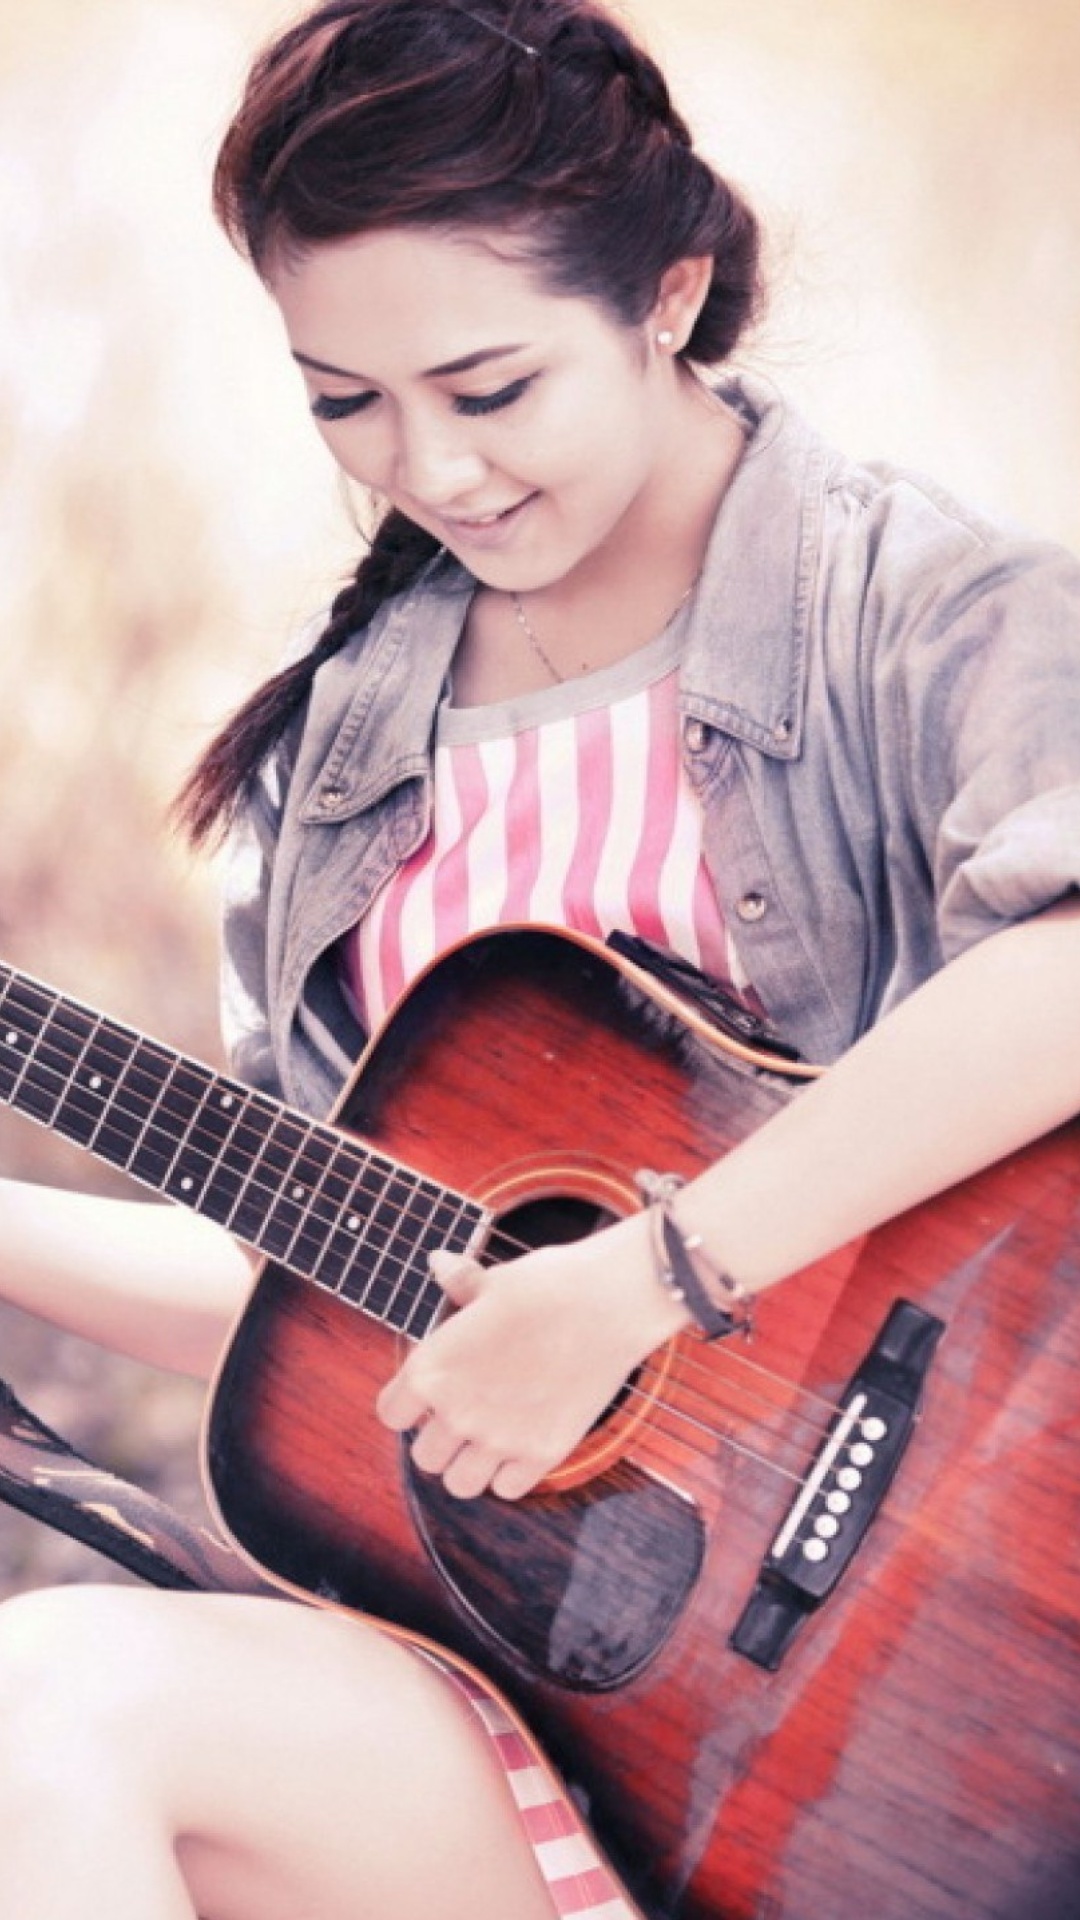 Das Chinese girl with guitar Wallpaper 1080x1920